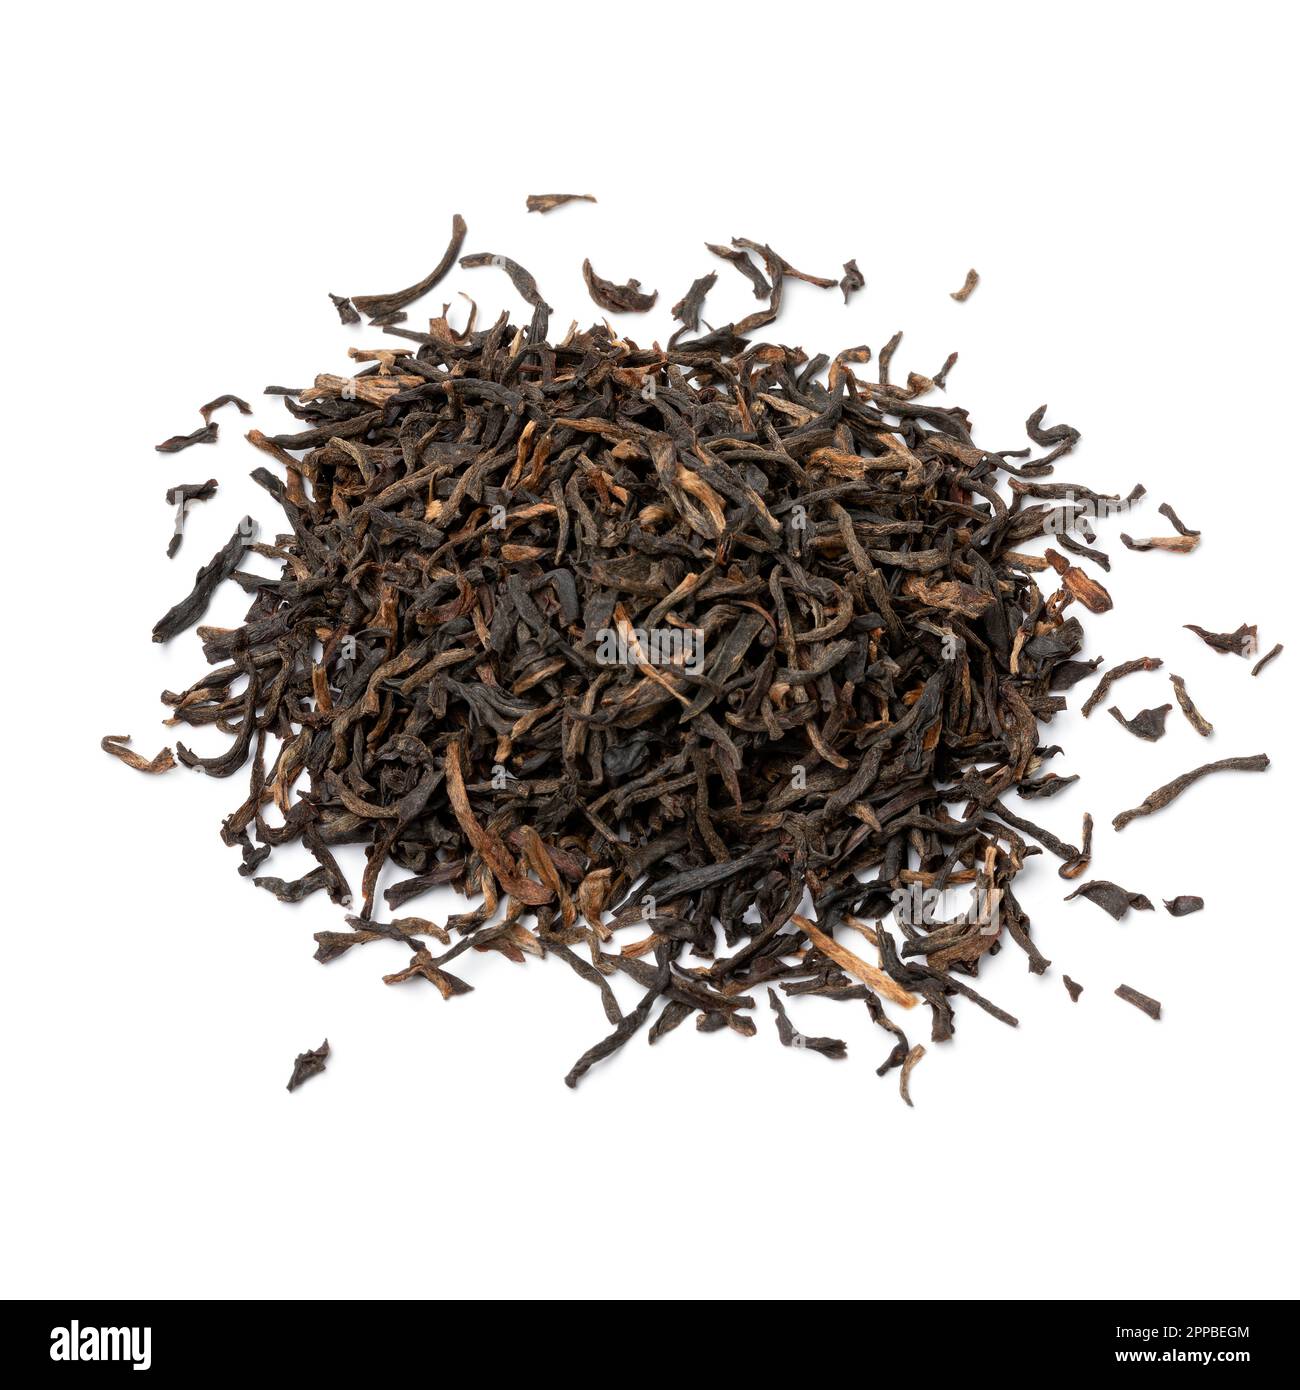 Heap of Indian Assam black Harmutty dried tea leaves close up isolated on white background Stock Photo